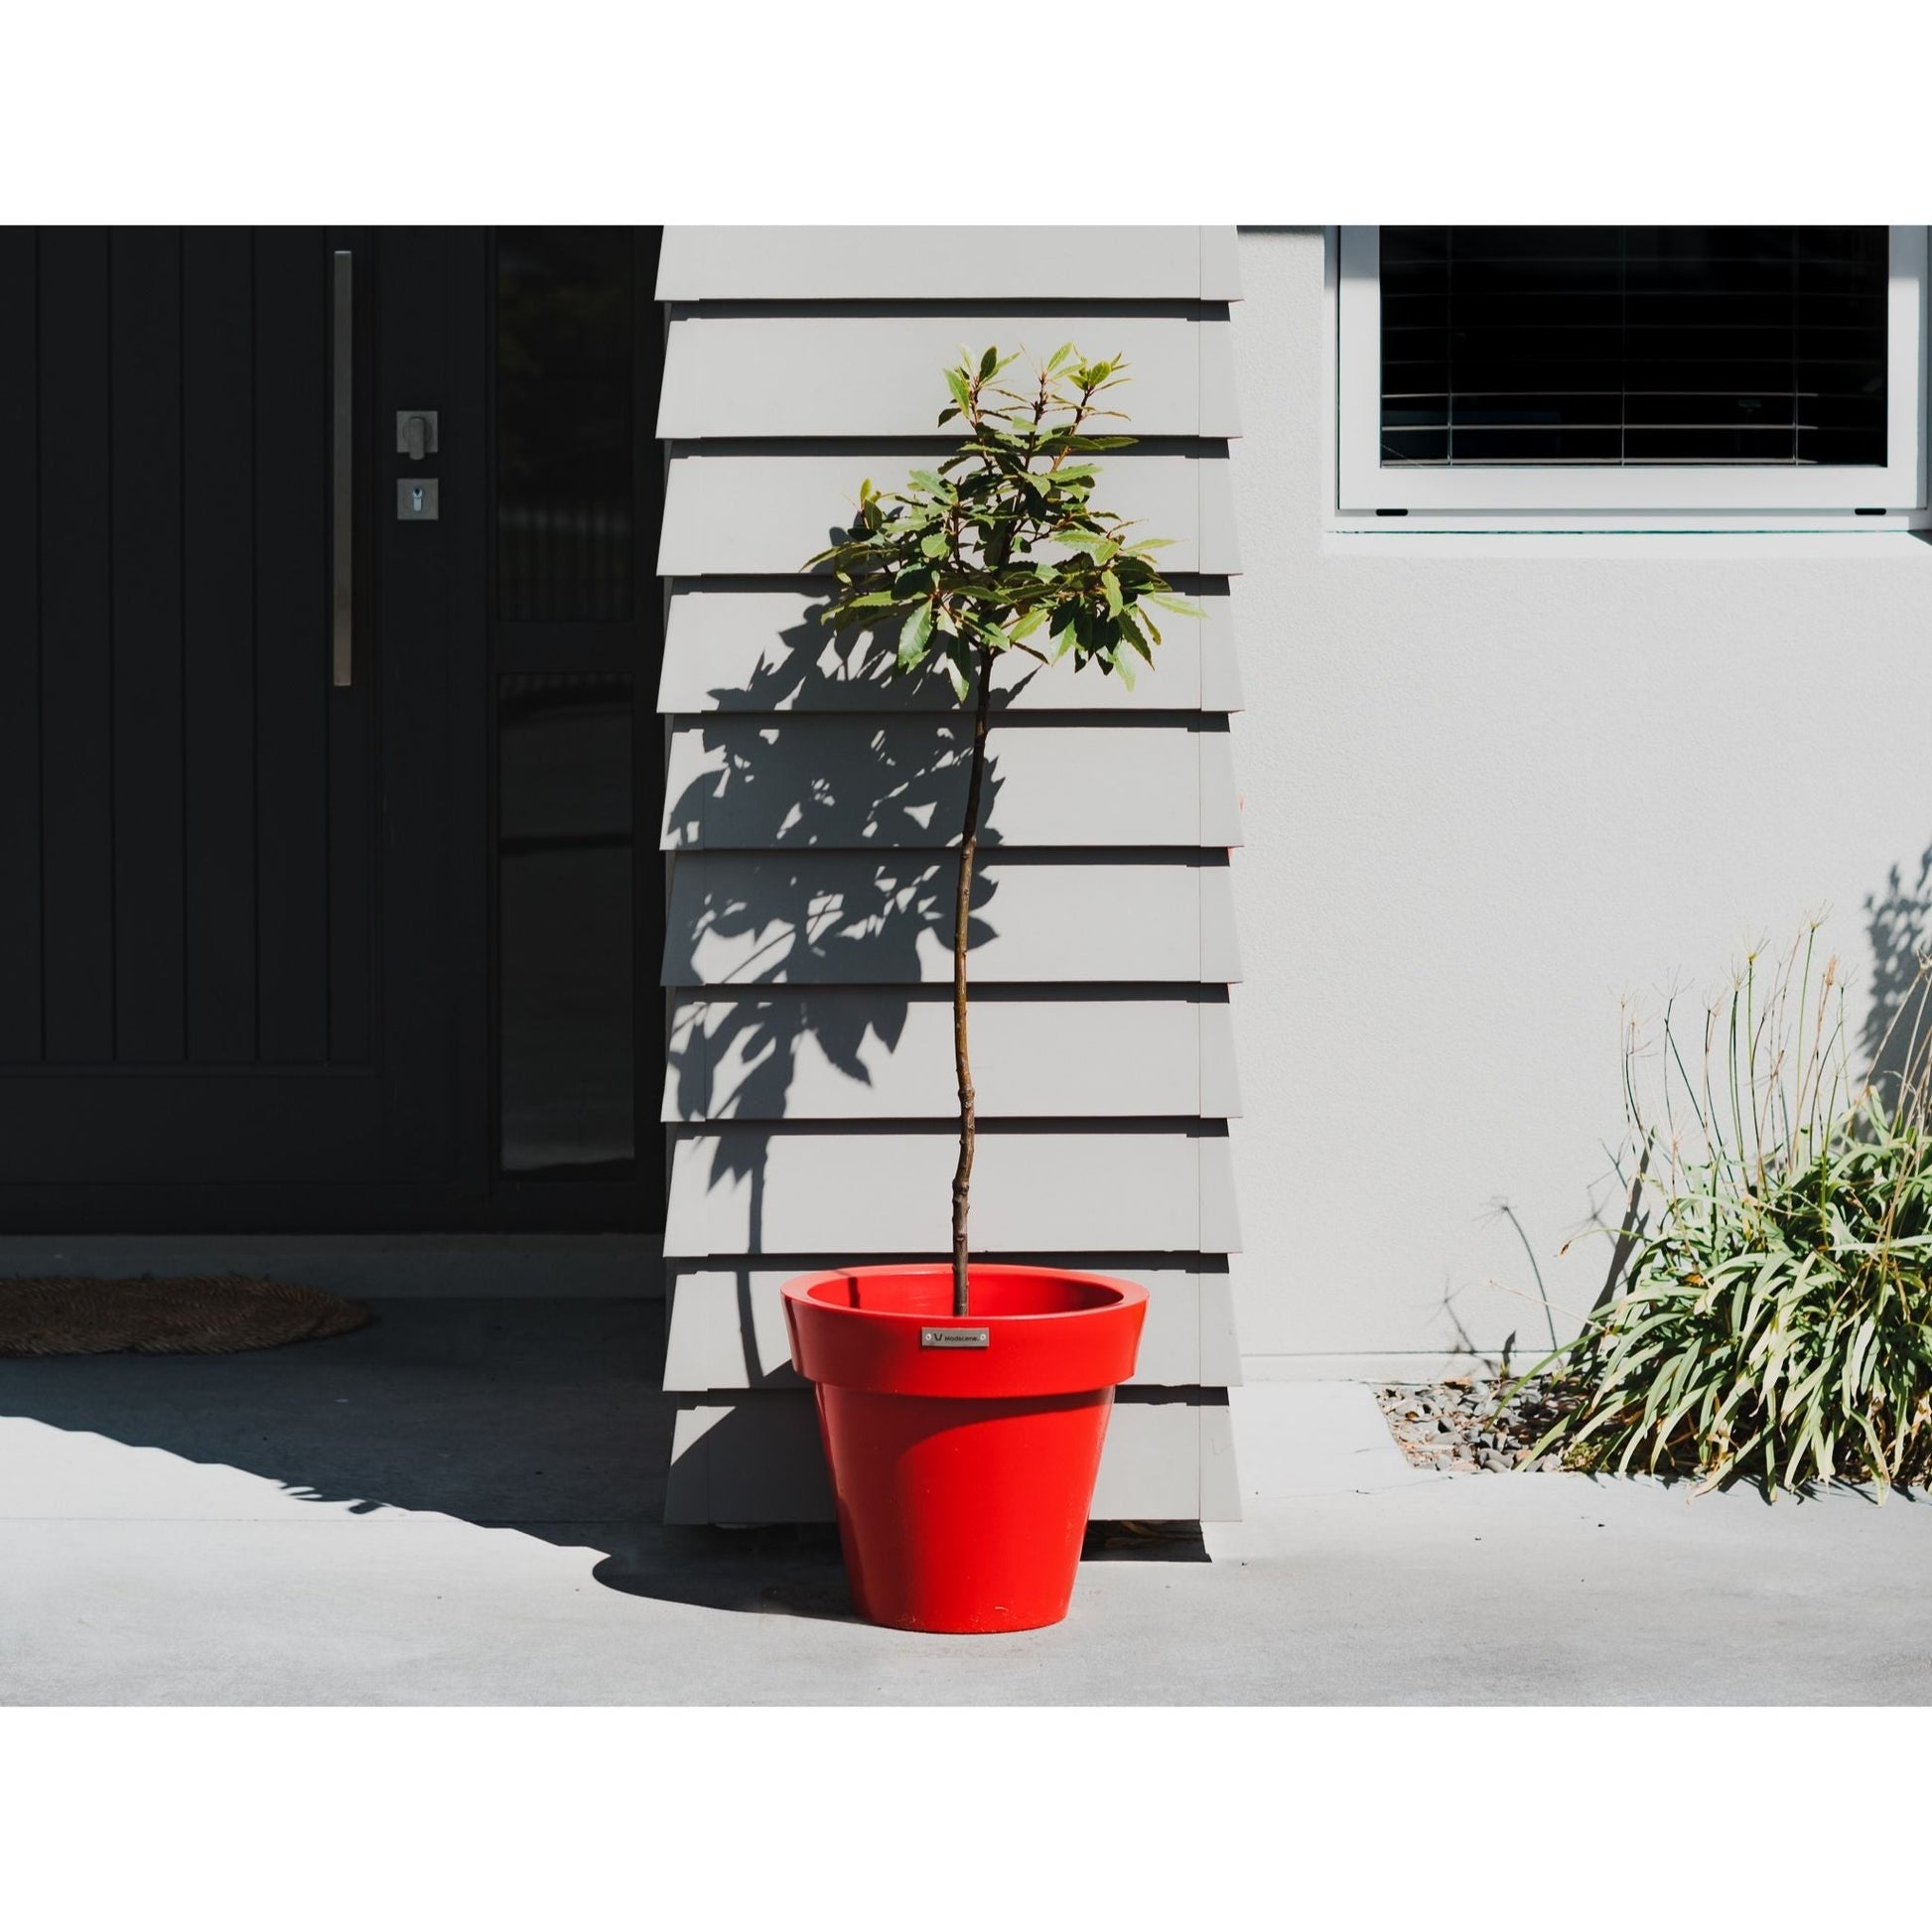 A small Modscene planter in red in front of a house entrance pillar.